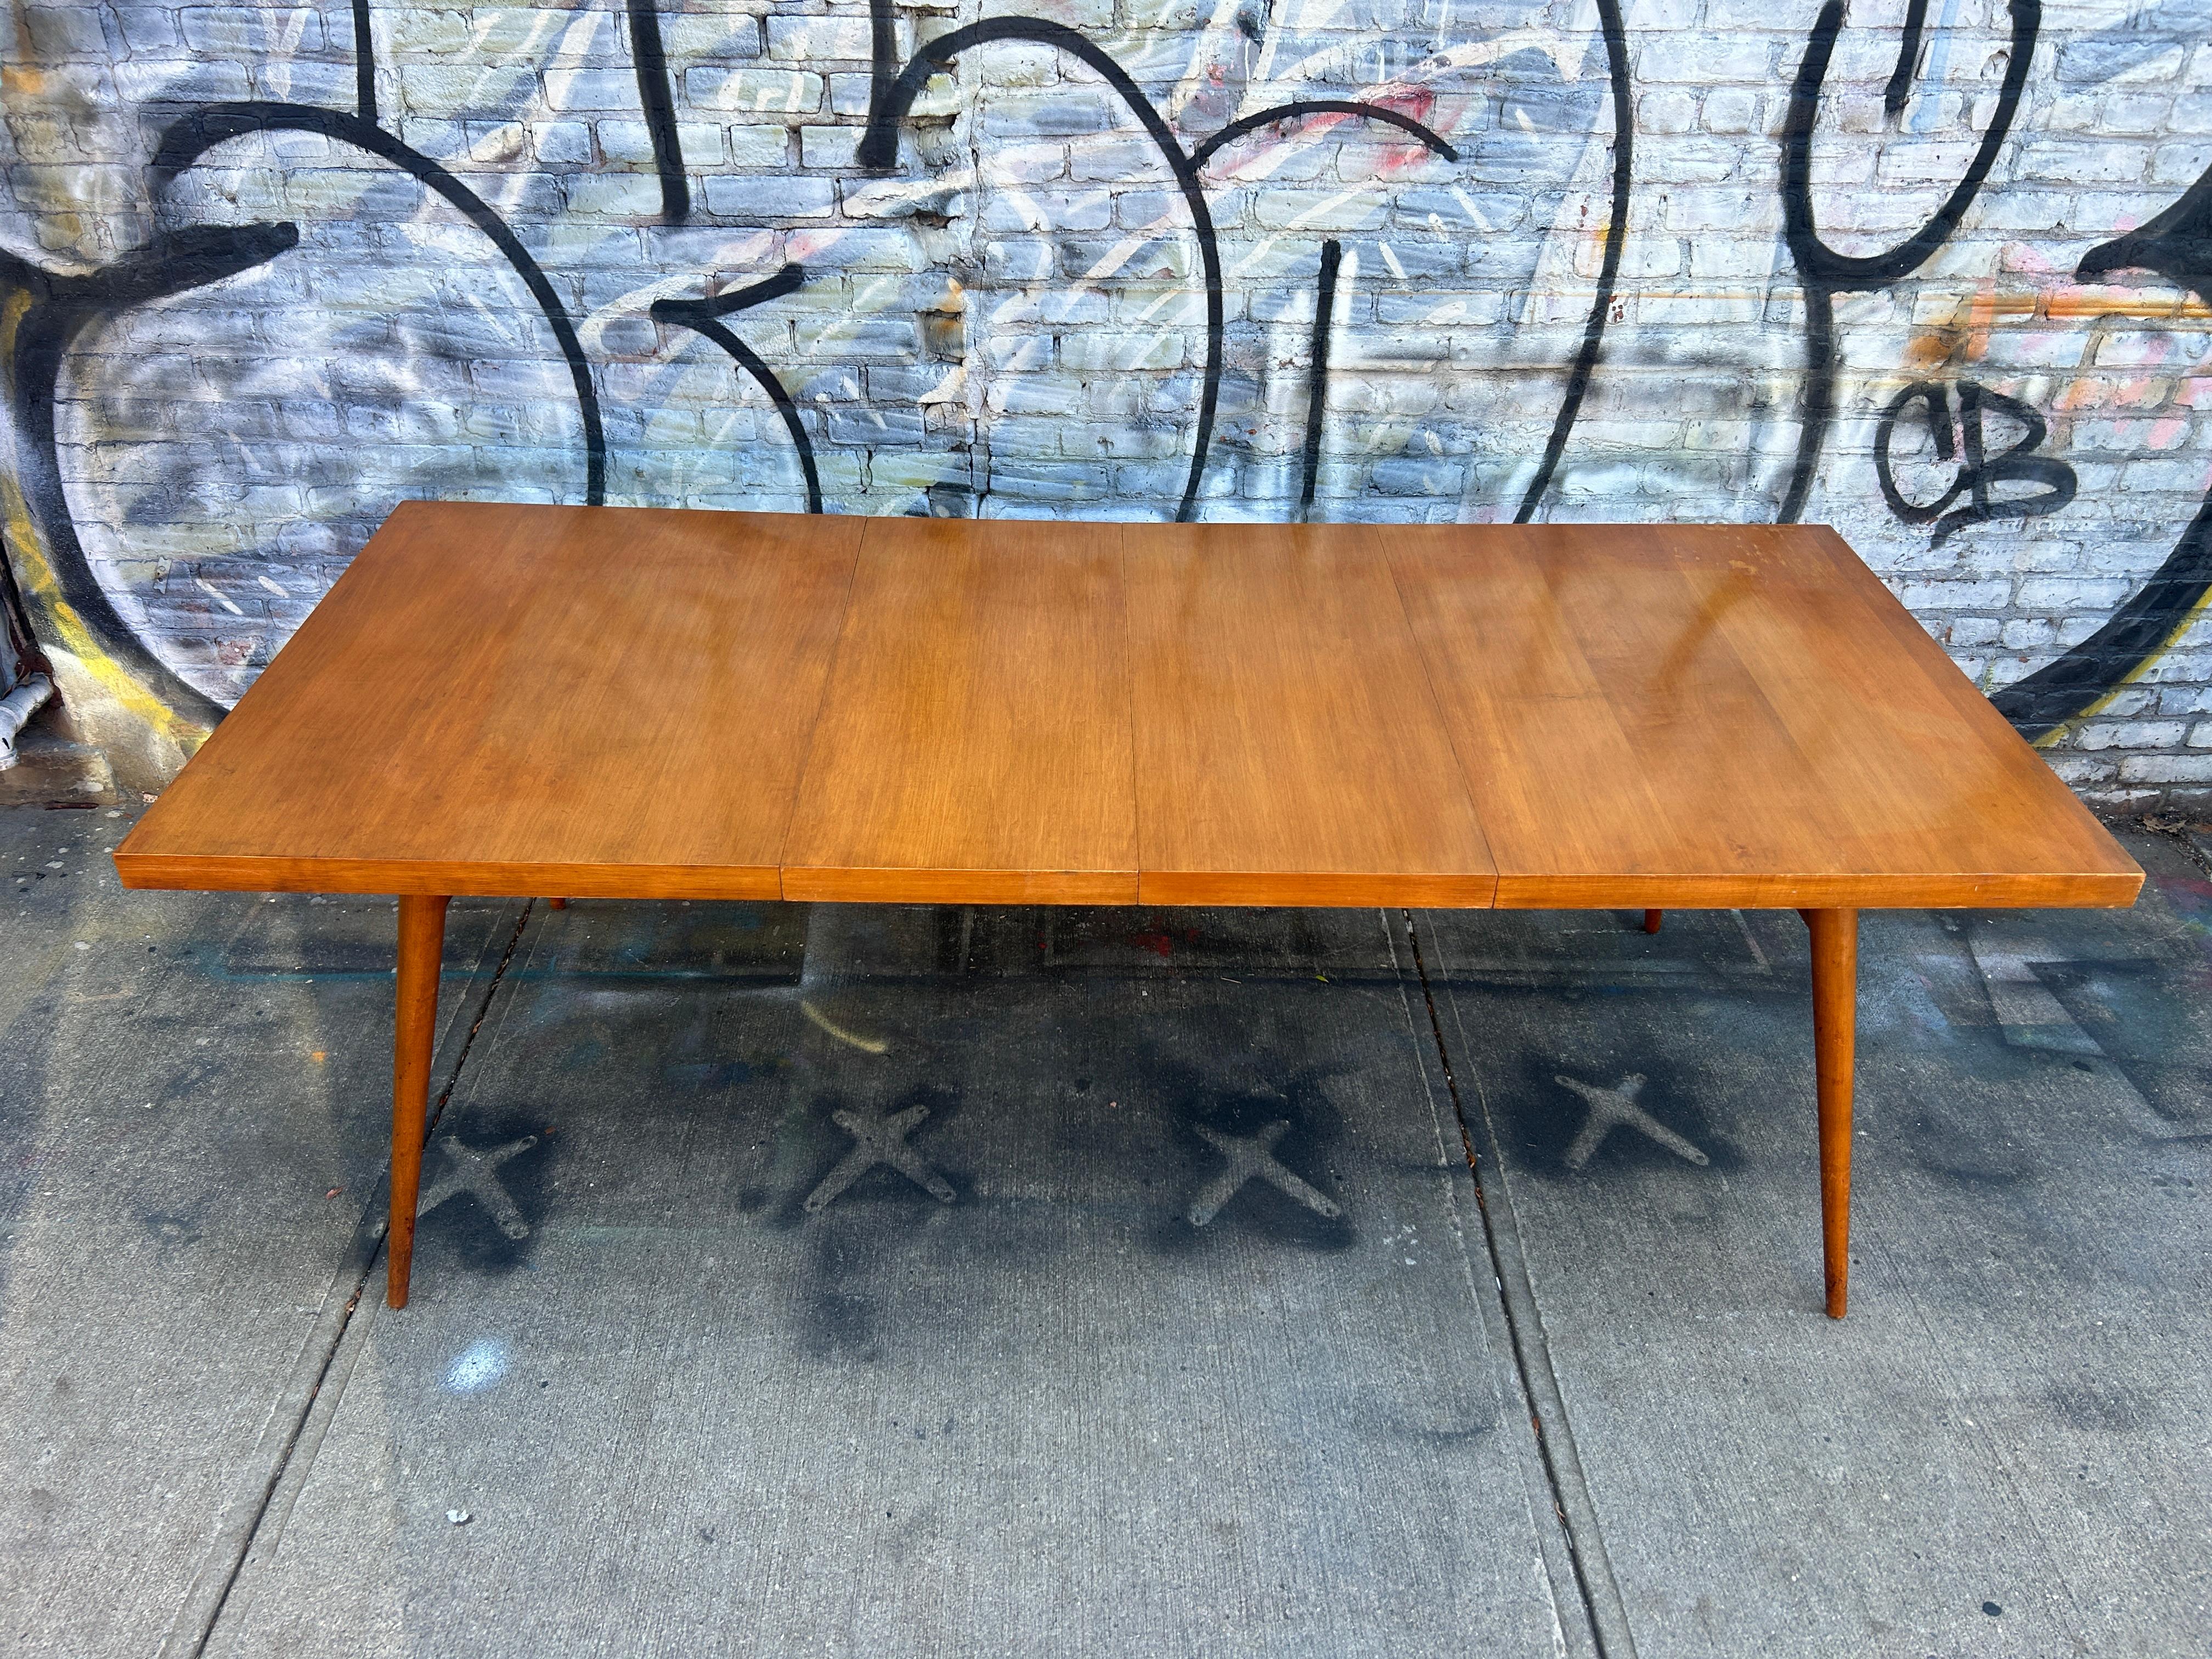 Woodwork Midcentury Paul McCobb Planner Group rectangle Maple #1522 Dining Table 2 leaves For Sale